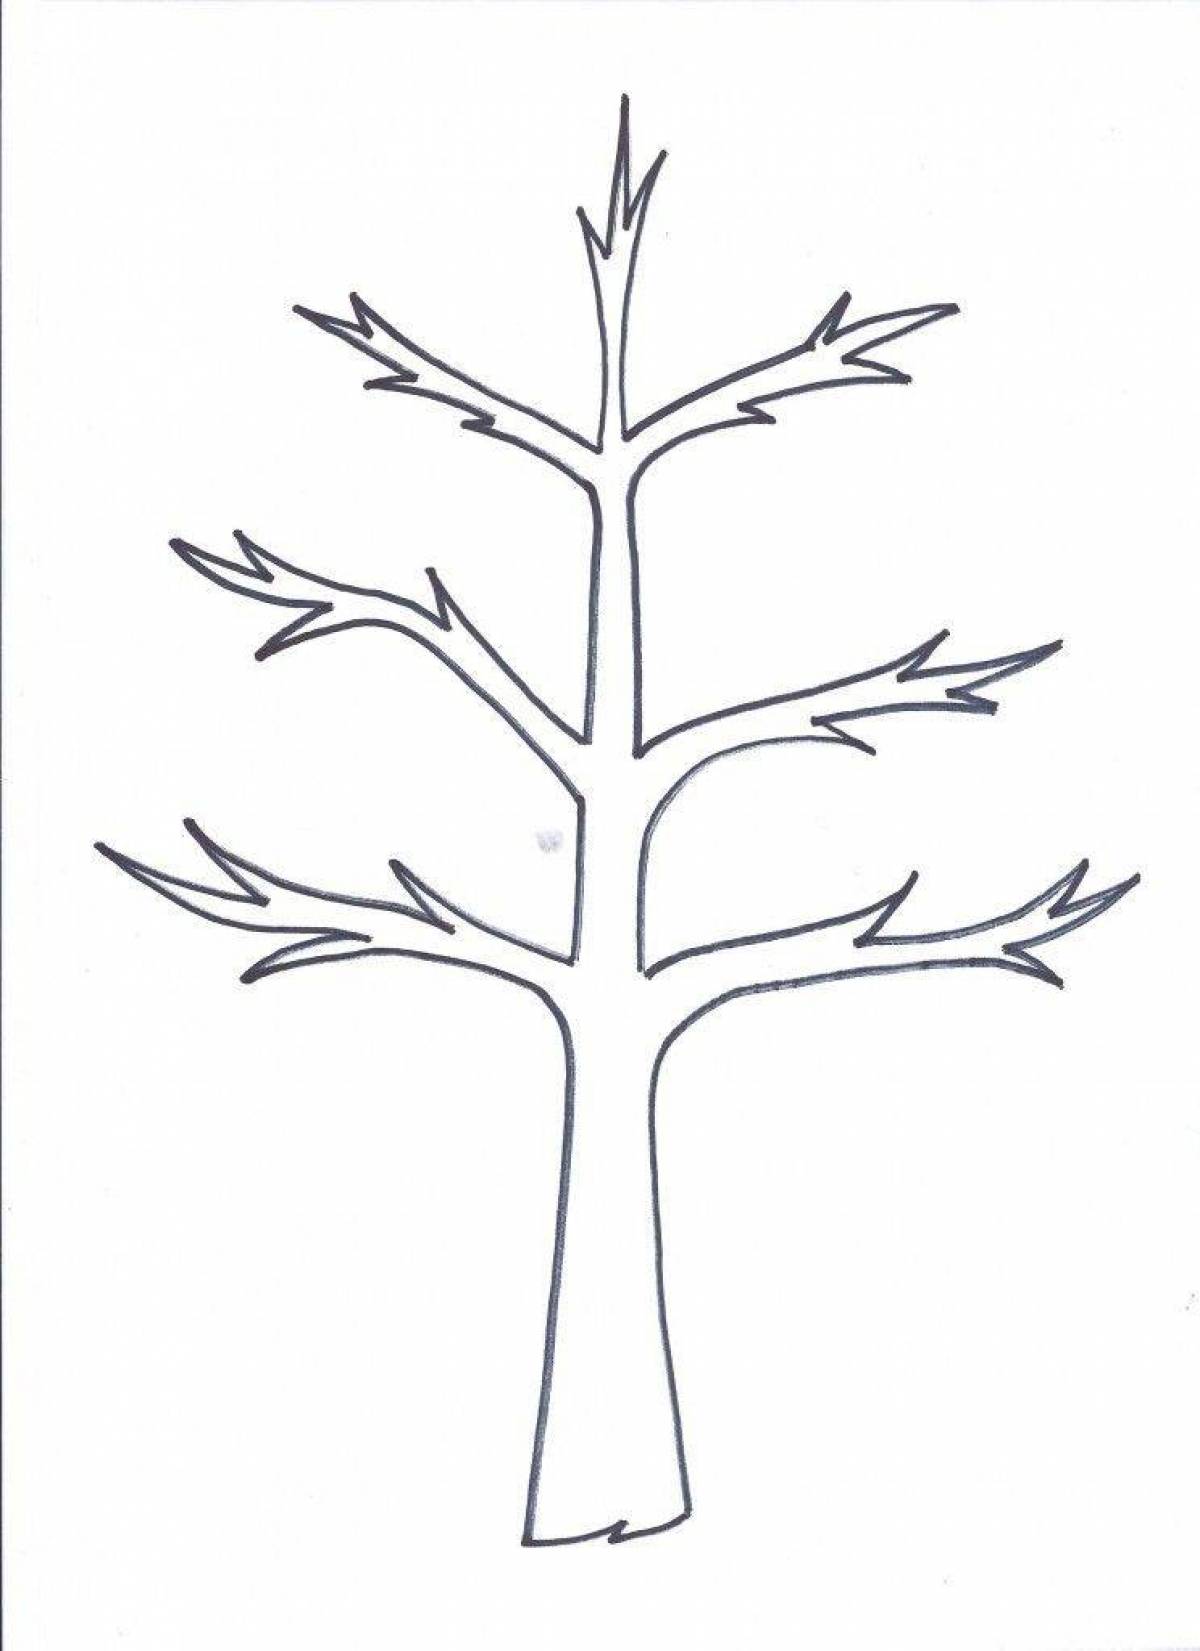 Coloring fairy tree without leaves for children